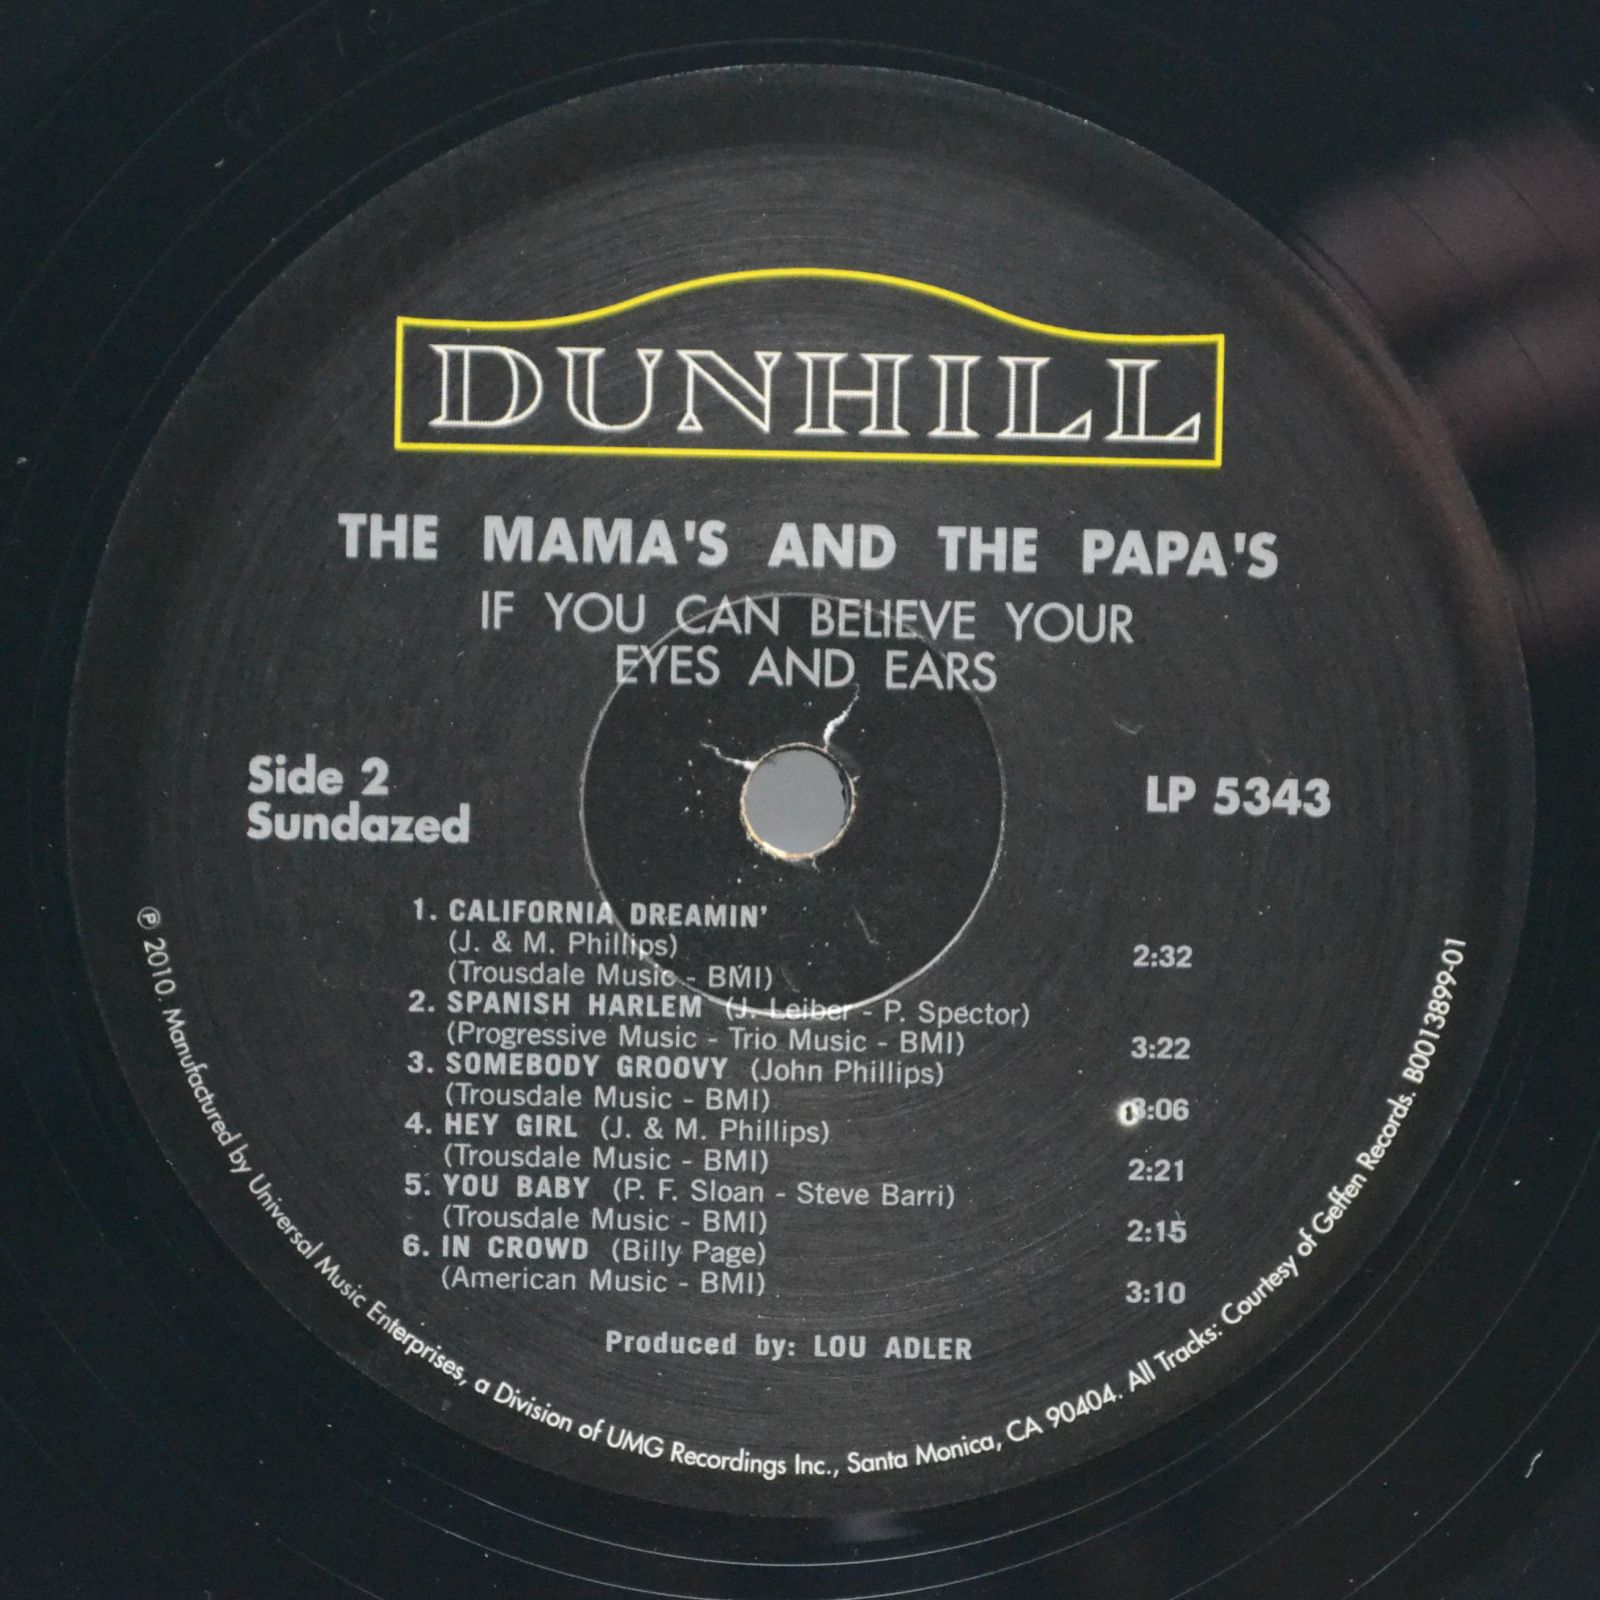 Mama's And The Papa's — If You Can Believe Your Eyes And Ears (USA), 1966